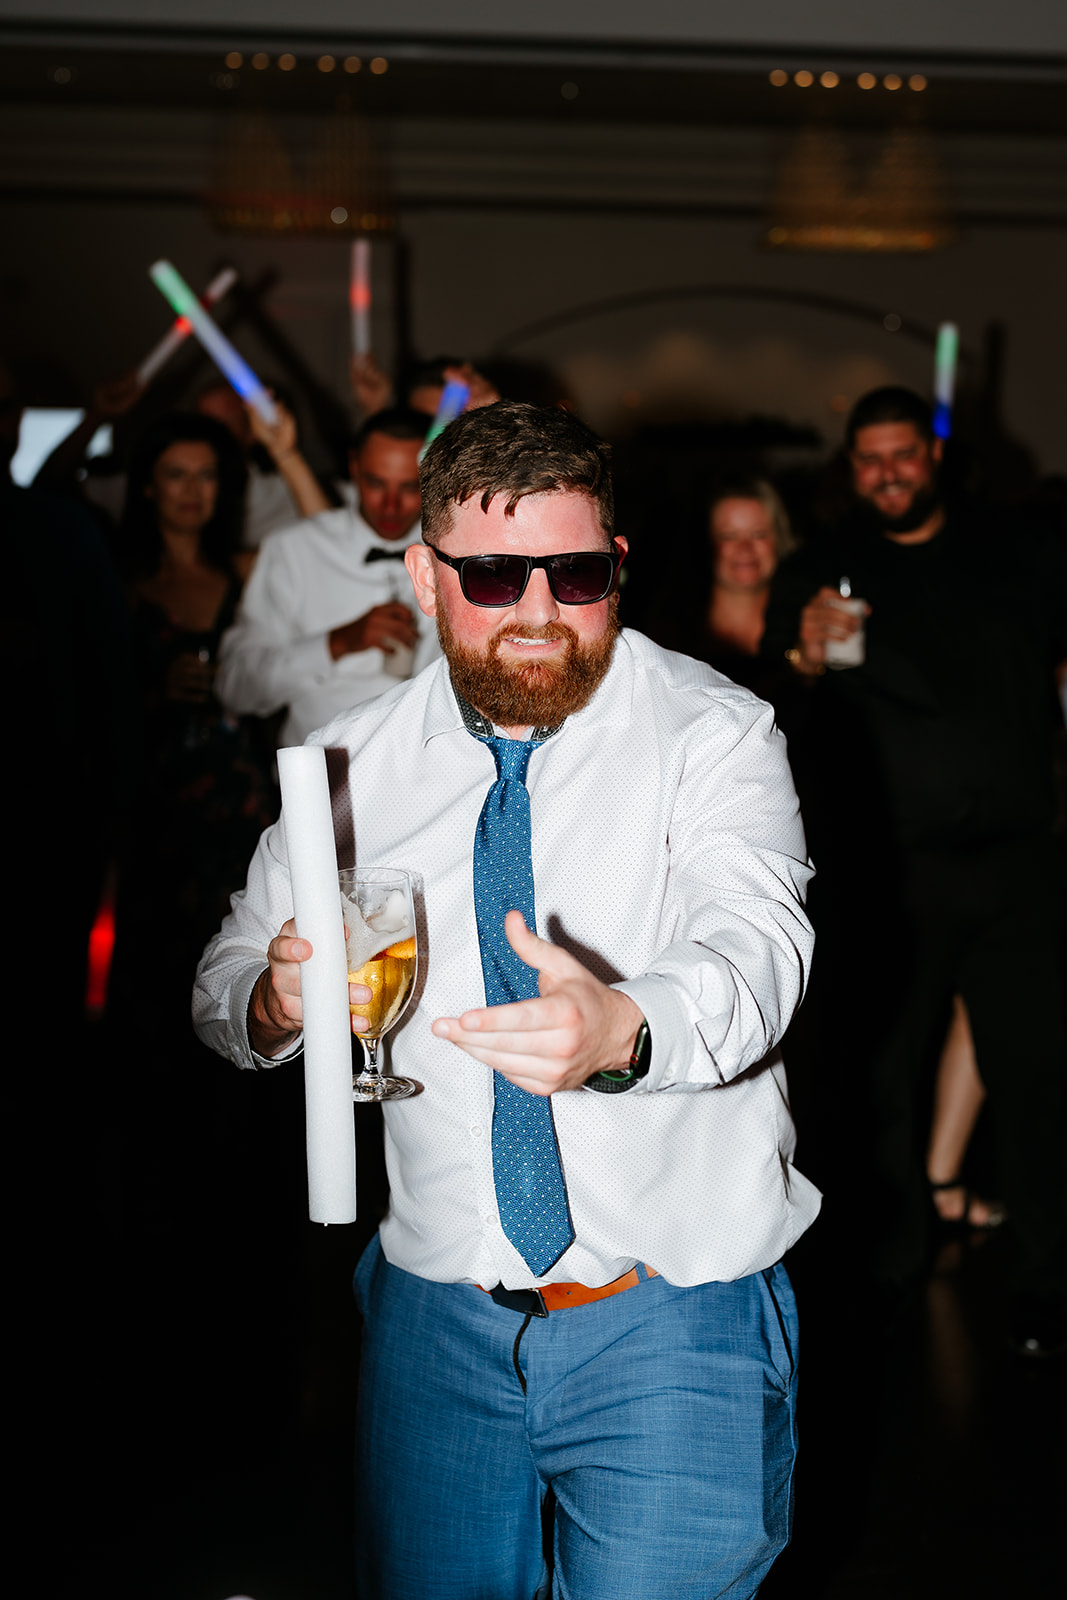 A man in a white shirt and tie, sporting sunglasses and a beard, dances with a drink in hand at a lively wedding with other guests holding colorful glow sticks in the background.